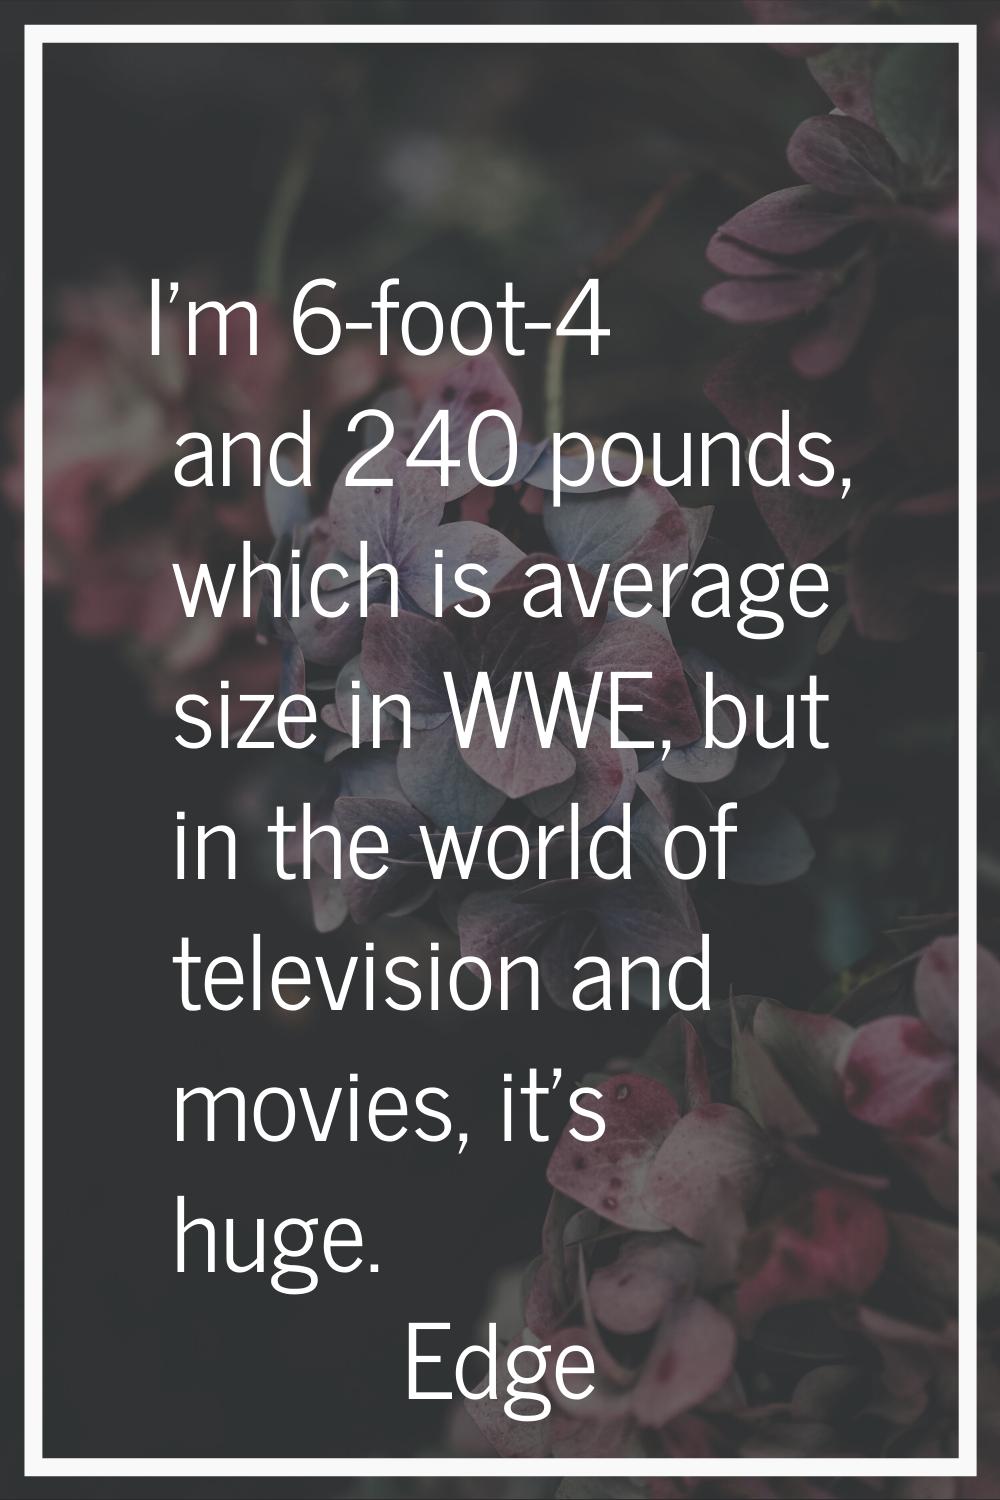 I'm 6-foot-4 and 240 pounds, which is average size in WWE, but in the world of television and movie